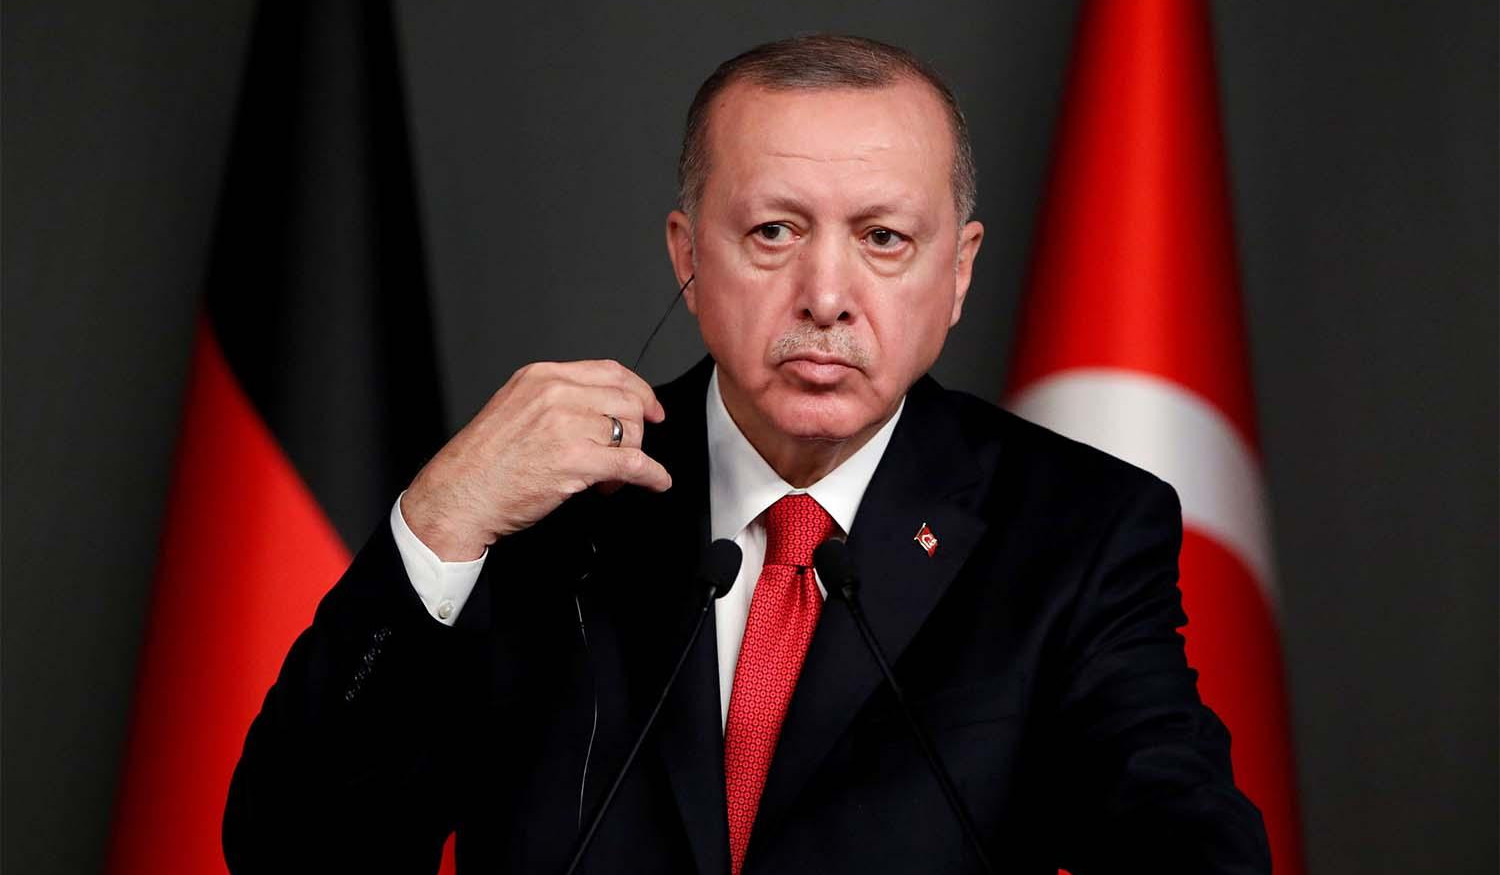 Turkey intends to buy more S-400 air defense systems from Russia: Erdogan